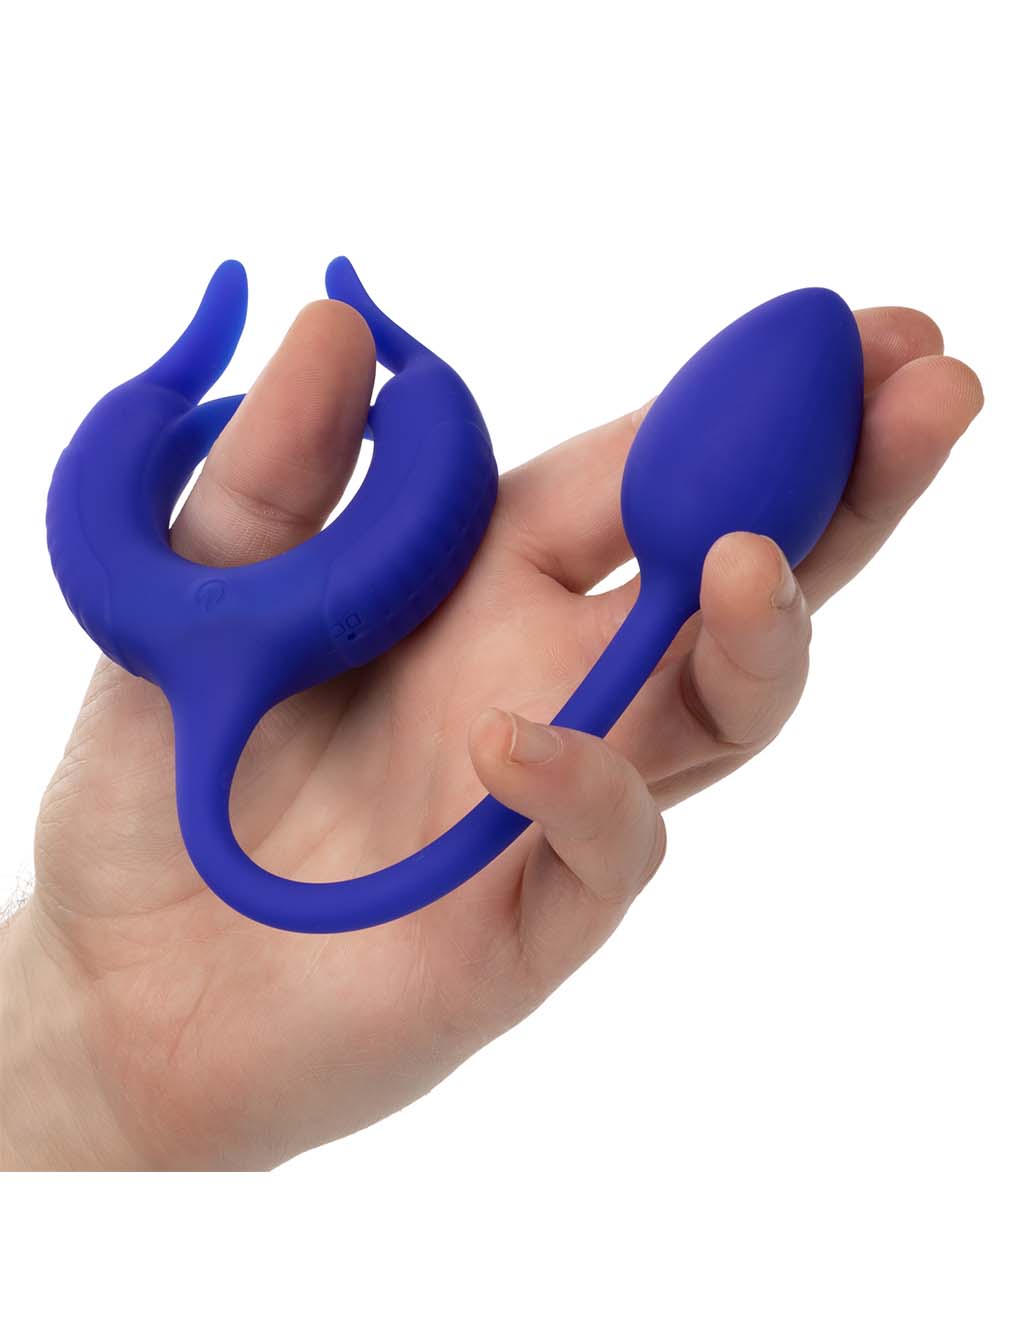 Admiral Plug & Play Weighted Cock Ring- In Hand